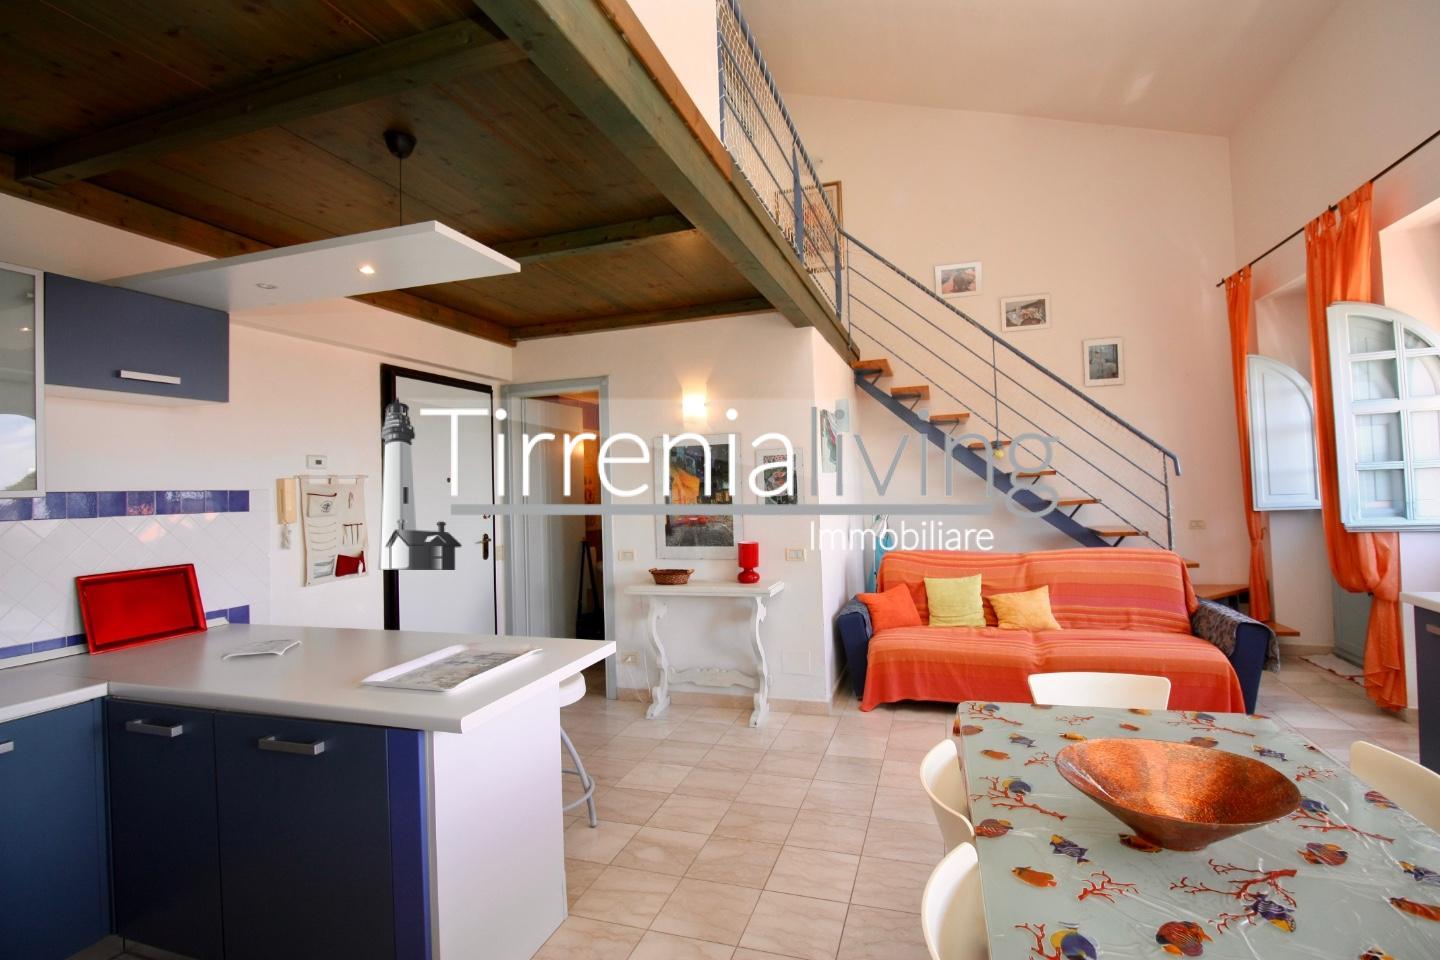 Apartment for holiday rentals, ref. C-264-E